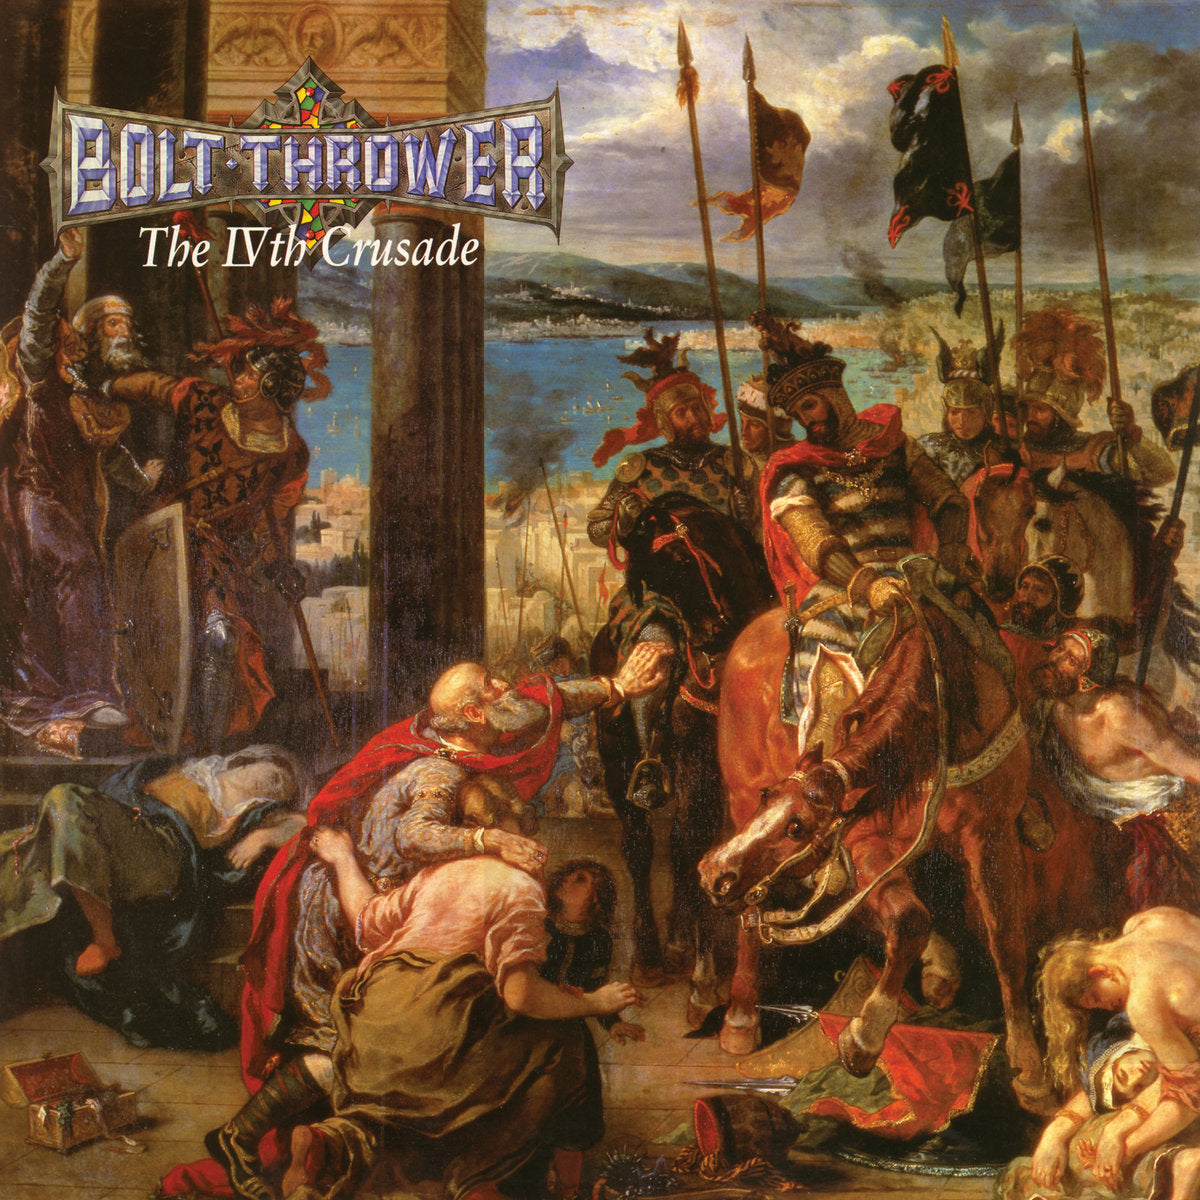 [SOLD OUT] BOLT THROWER "The IVth Crusade" CD (digipak)